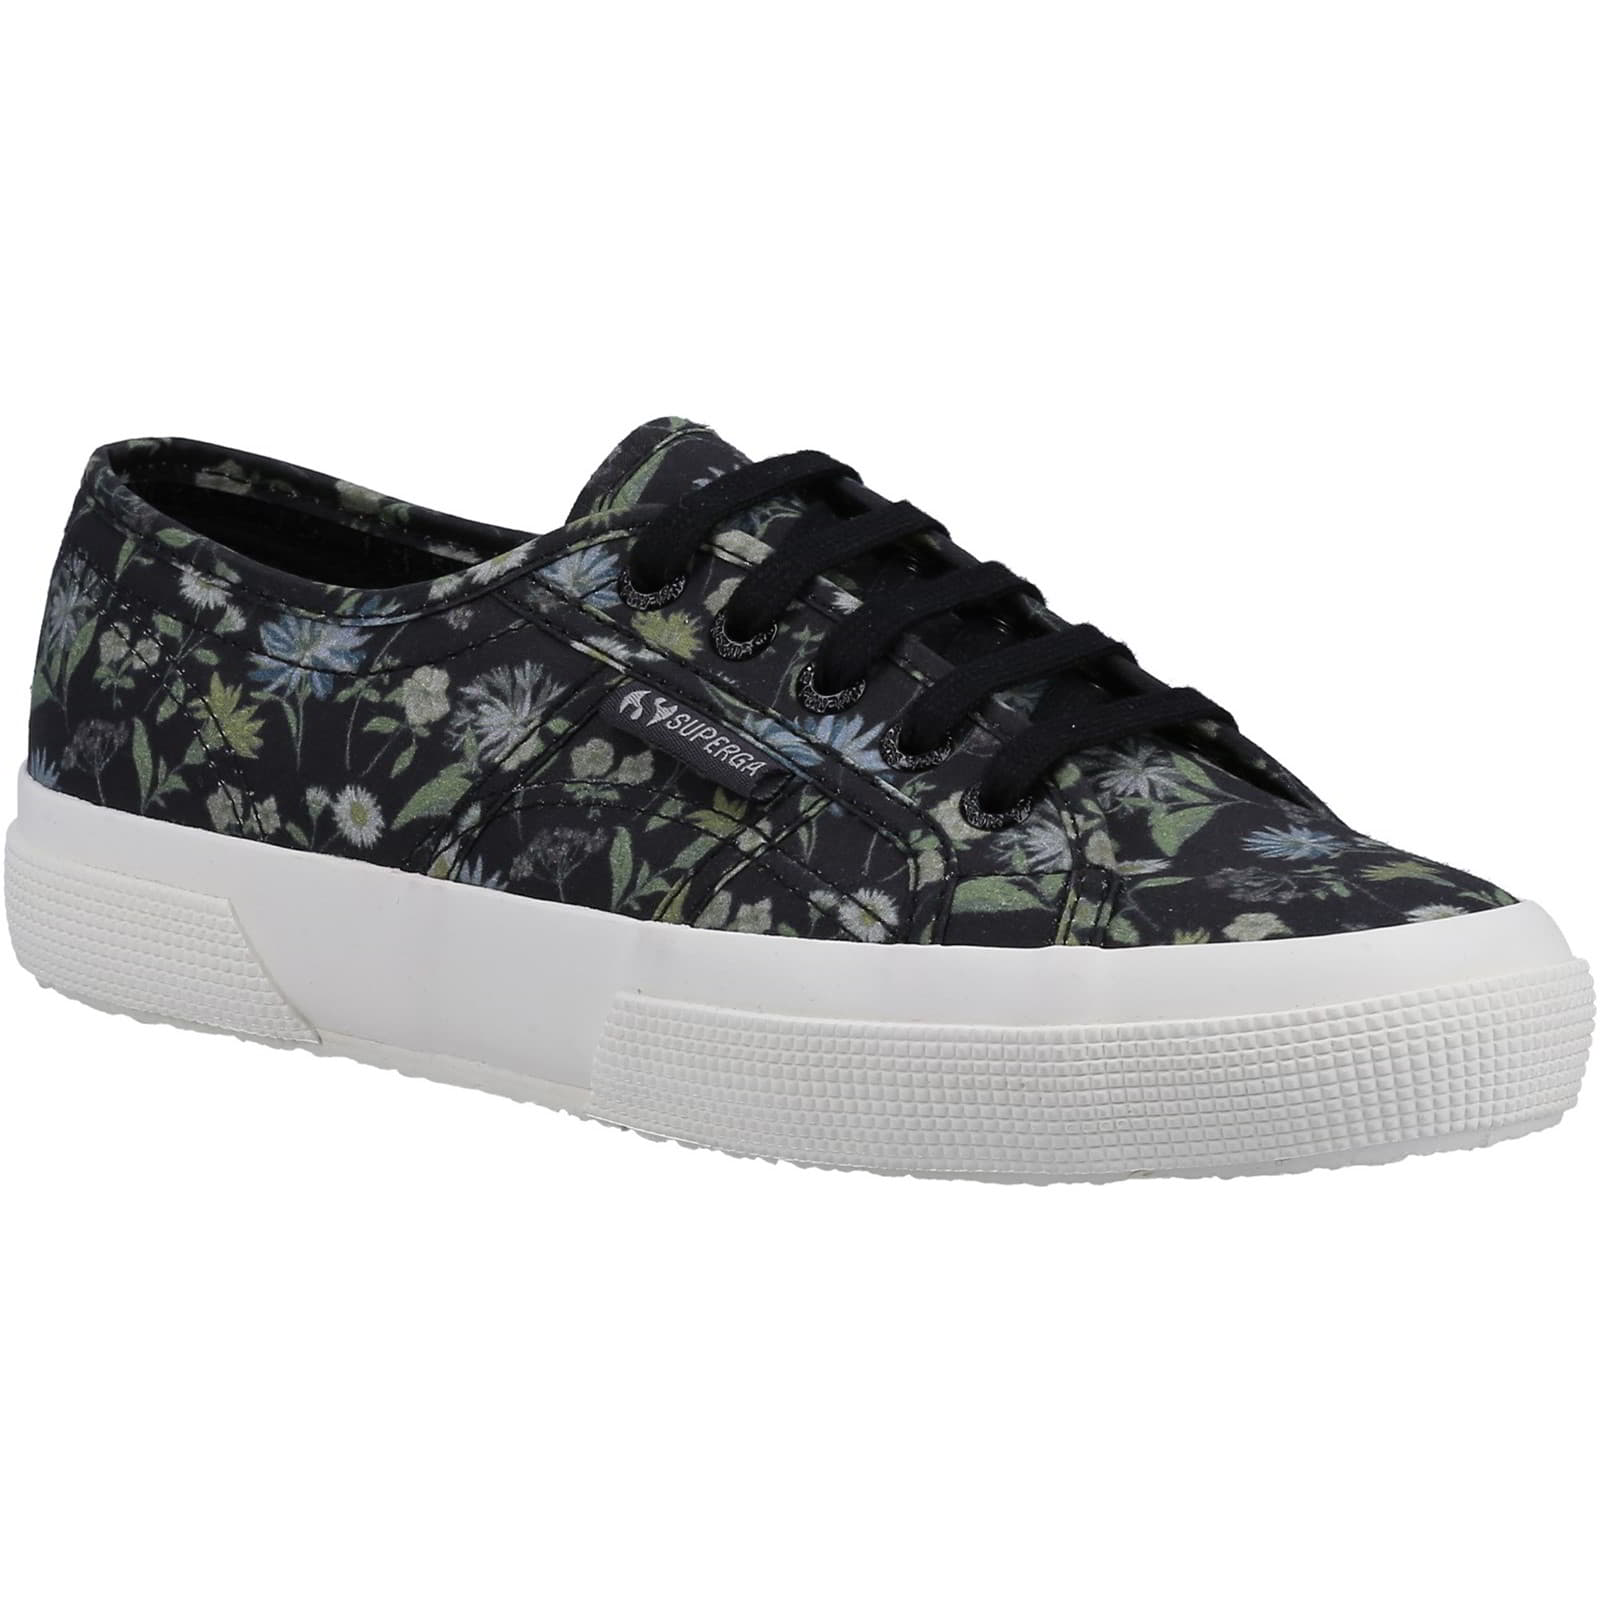 Superga Women's 2750 Floral Print Lace Up Trainers Shoes - UK 8